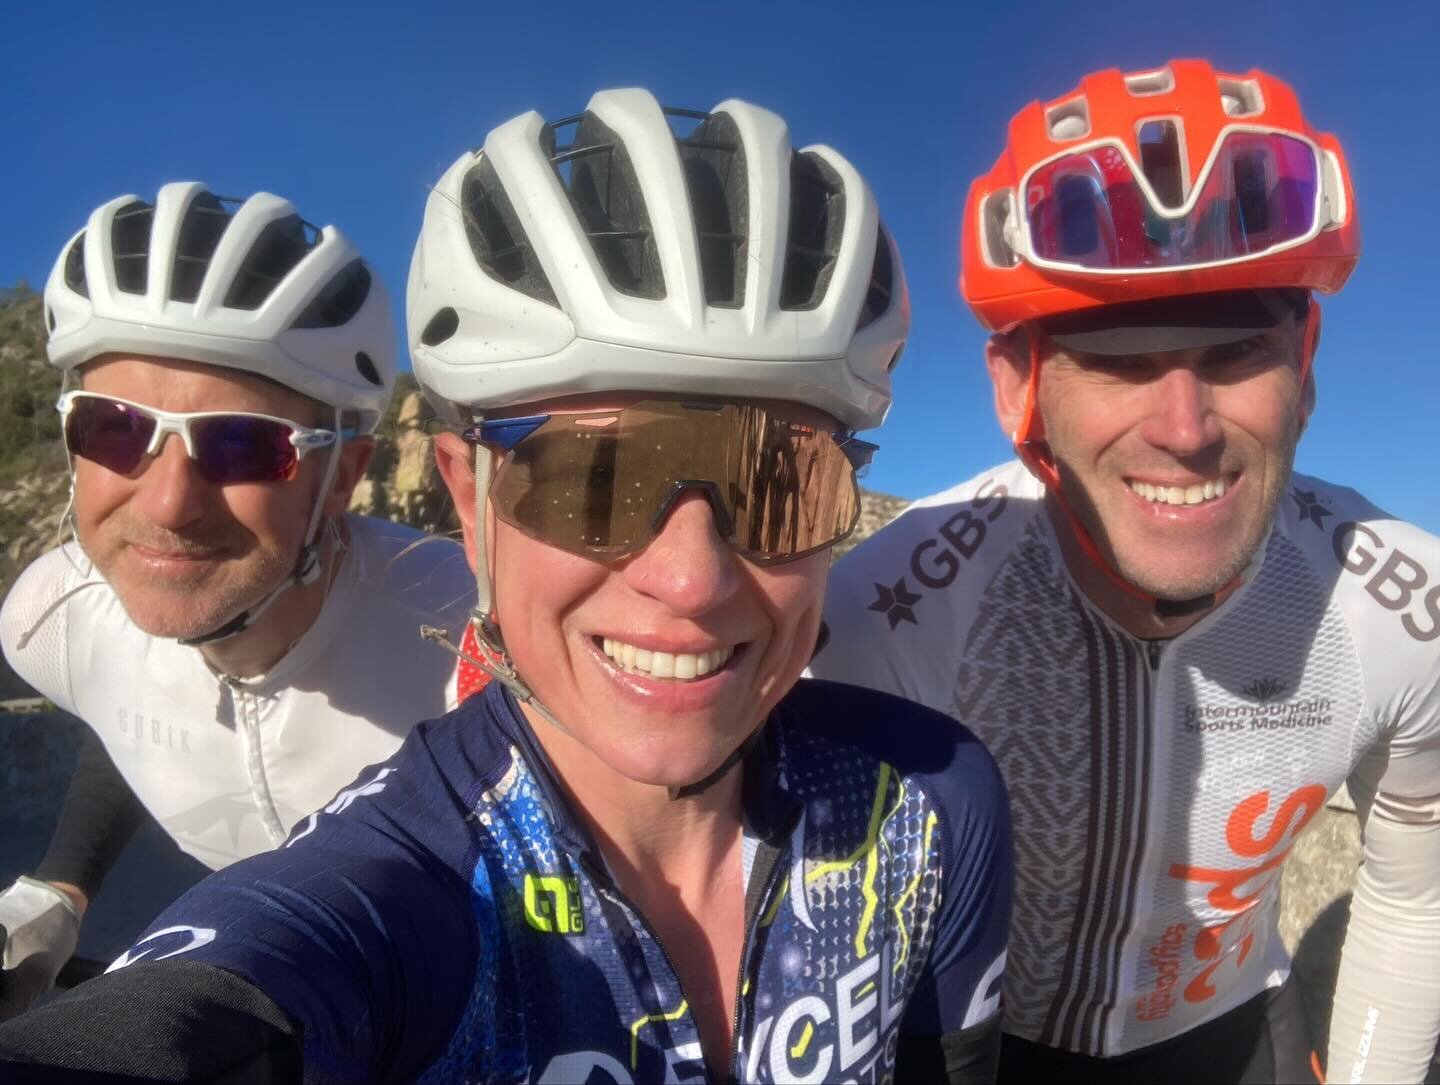 Cycling season just got rolling with SPCC peep heading south to warm-sunny Arizona.🌵☀️ 

Flavia @lilcrush27 , Todd, and Shep had a blast riding the Project Echelon Gran Fondo and Fundraiser in Tucson to assist veterans returning to civilian life. Wh